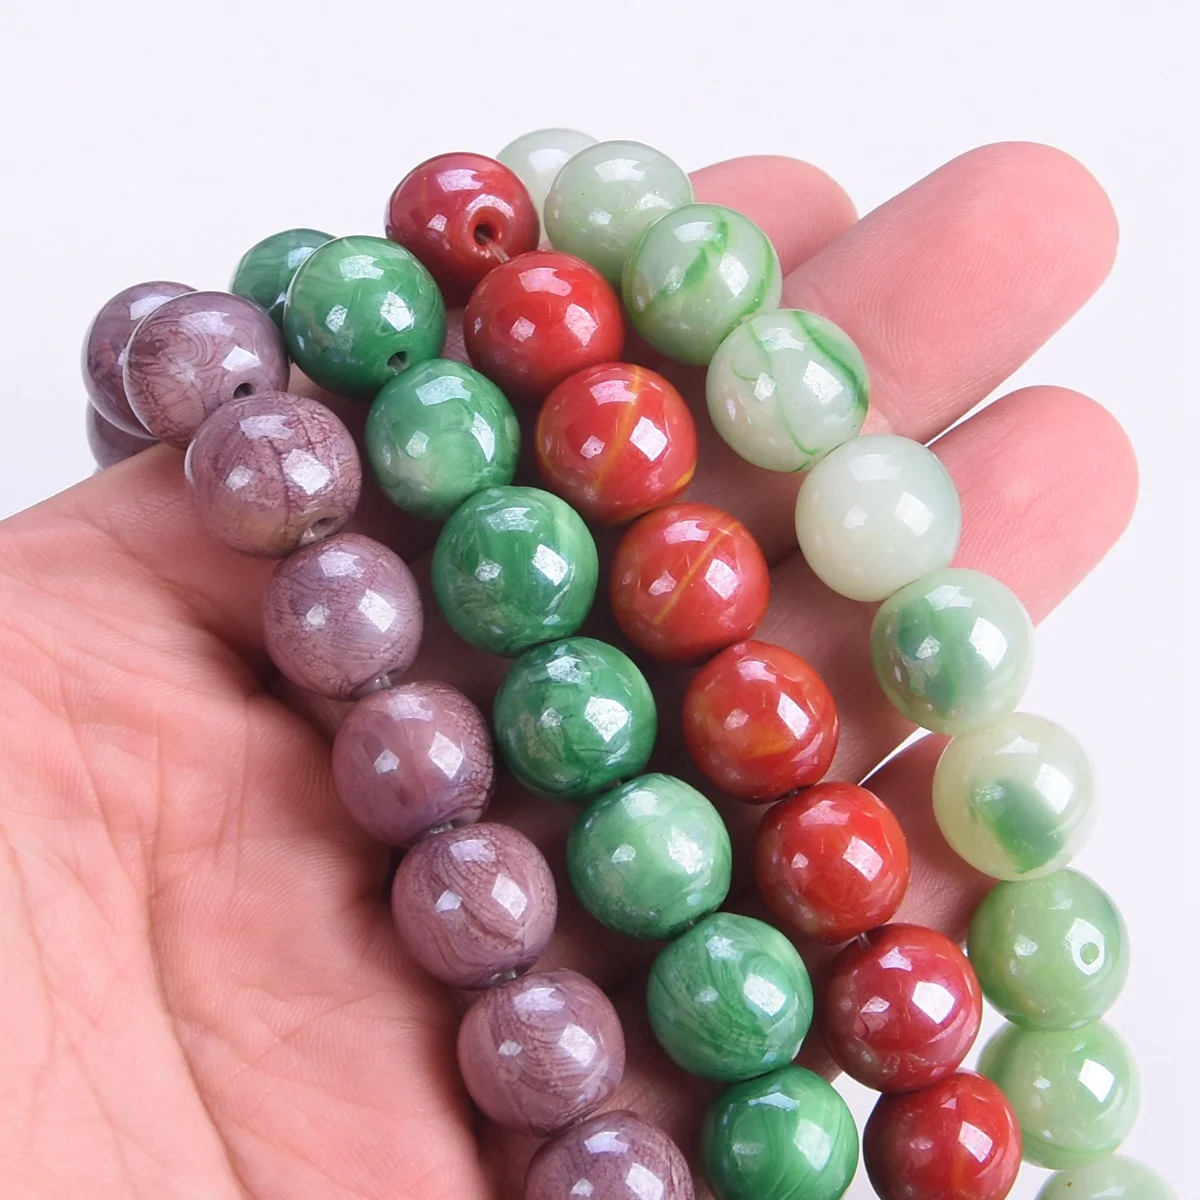 10pcs 14mm Round Jade Like Opaque Lampwork Glass Loose Crafts Beads For Jewelry Making DIY Bracelet Findings 20pcs 10mm clover shape lampwork glass loose floral beads for jewelry making diy crafts findings supplies